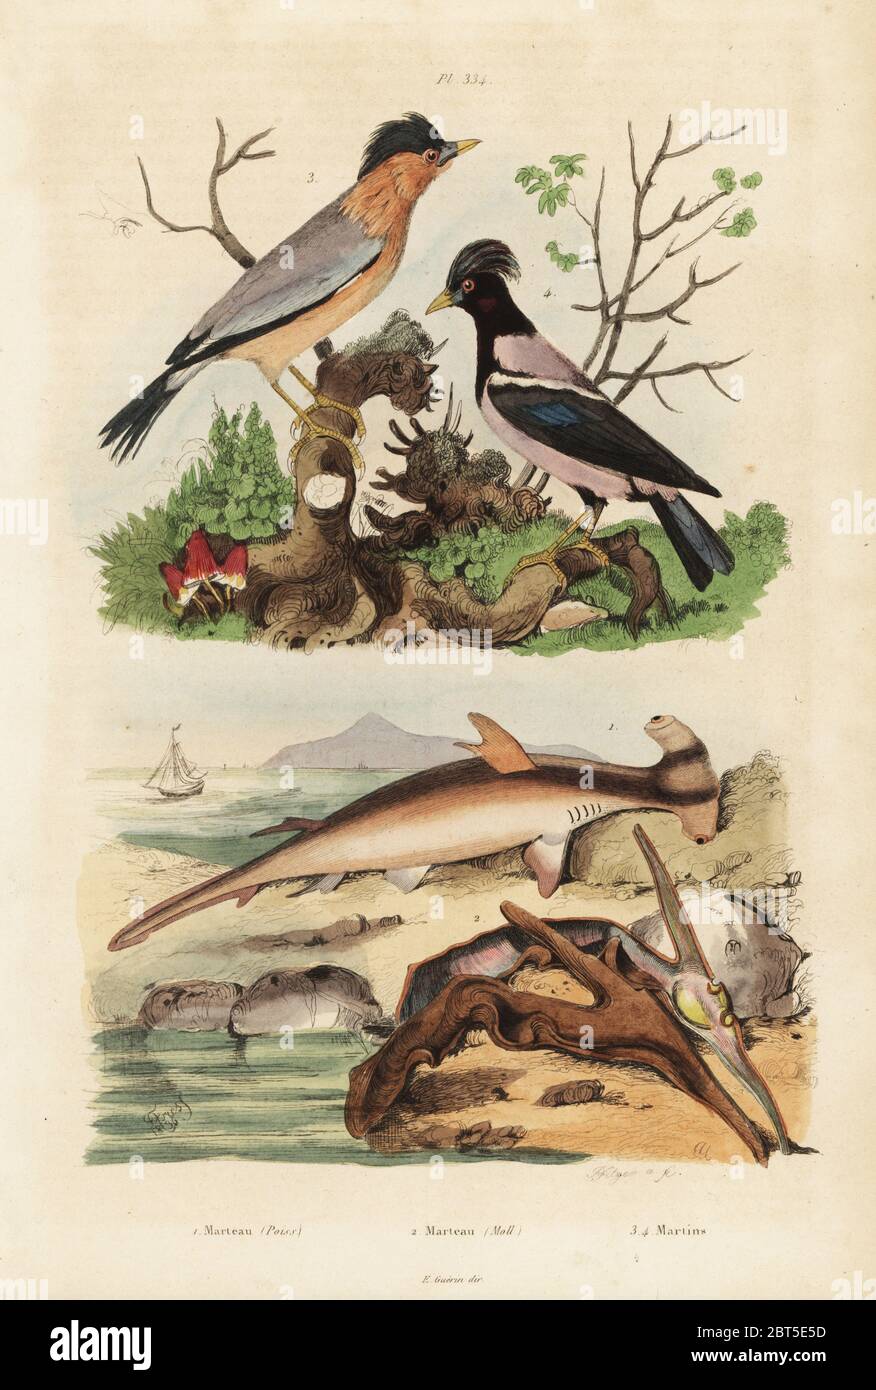 Smooth hammerhead, Sphyrna malleus 1, hammer oyster, Malleus malleus 2, brahminy myna, Sturnia pagodarum 3 and rosy starling, Pastor roseus 4. Marteau (poiss), Marteau (moll), martins. Handcoloured steel engraving by Pfitzer after an illustration by Adolph Fries from Felix-Edouard Guerin-Meneville's Dictionnaire Pittoresque d'Histoire Naturelle (Picturesque Dictionary of Natural History), Paris, 1834-39. Stock Photo